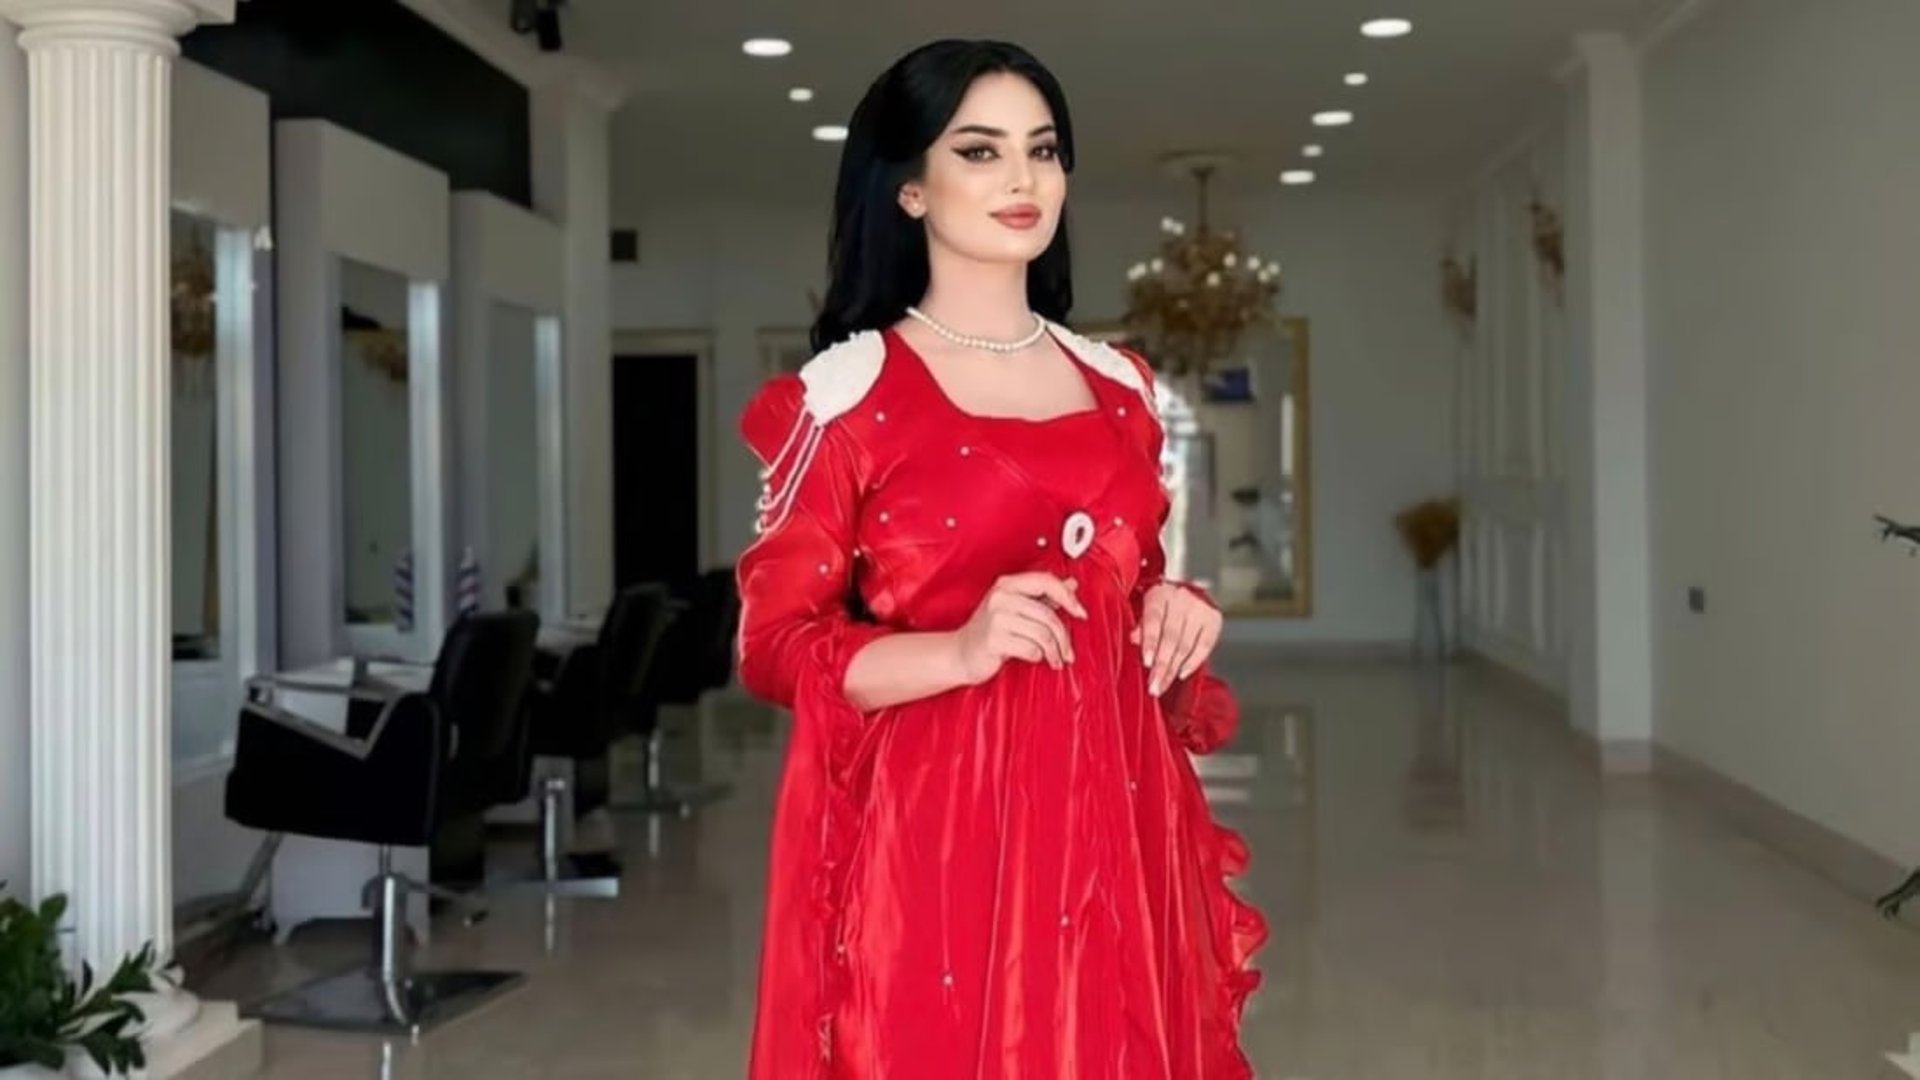 Yazidi woman advances to finals of Miss Middle East and North Africa pageant